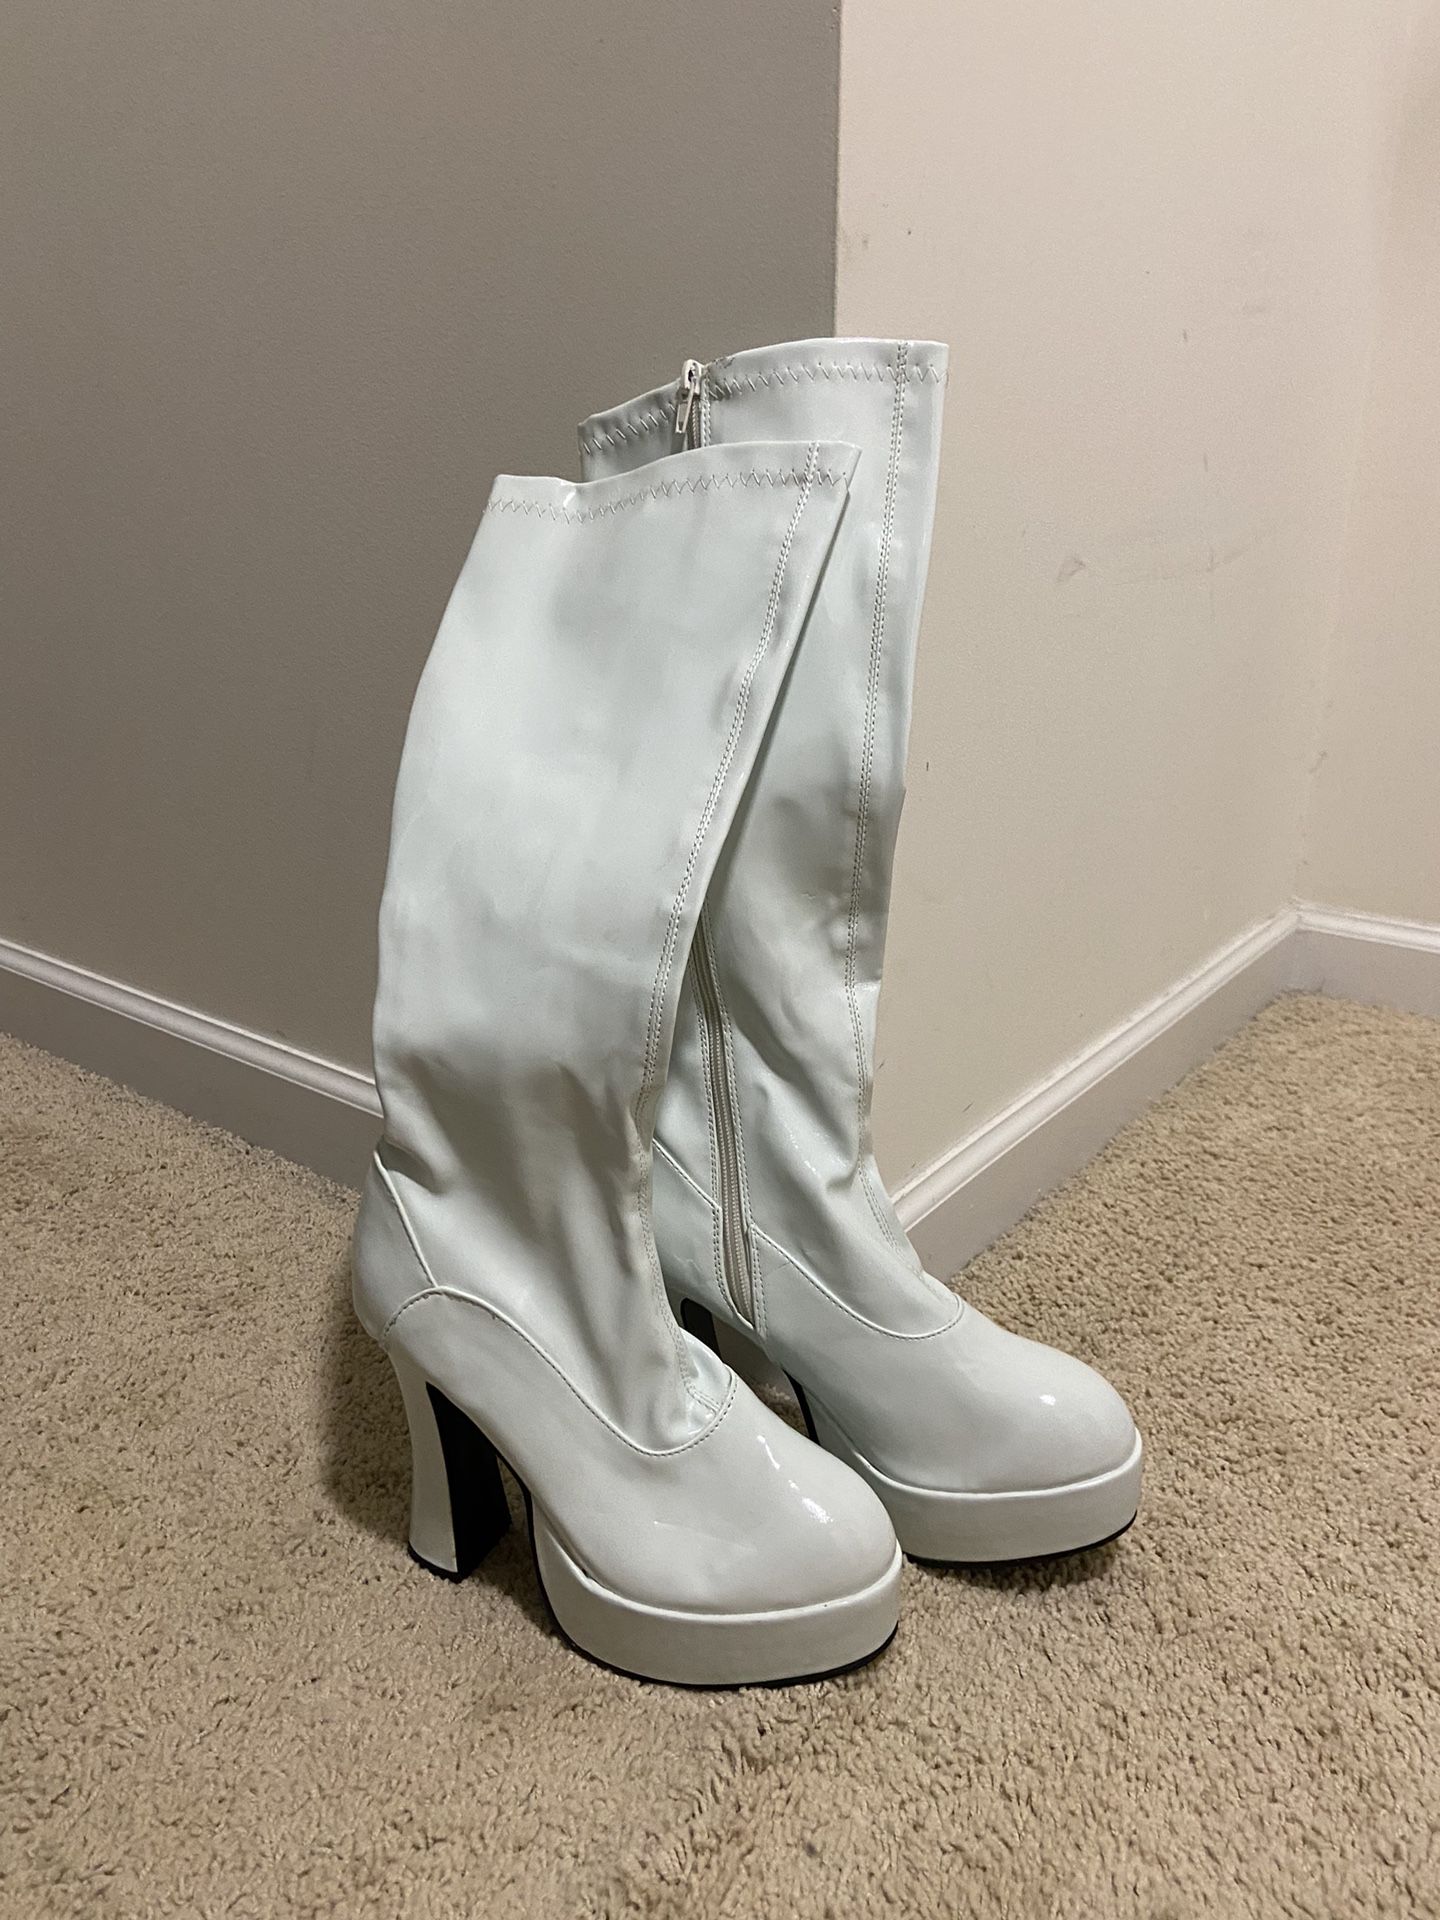 White Leather Platform Boots. 